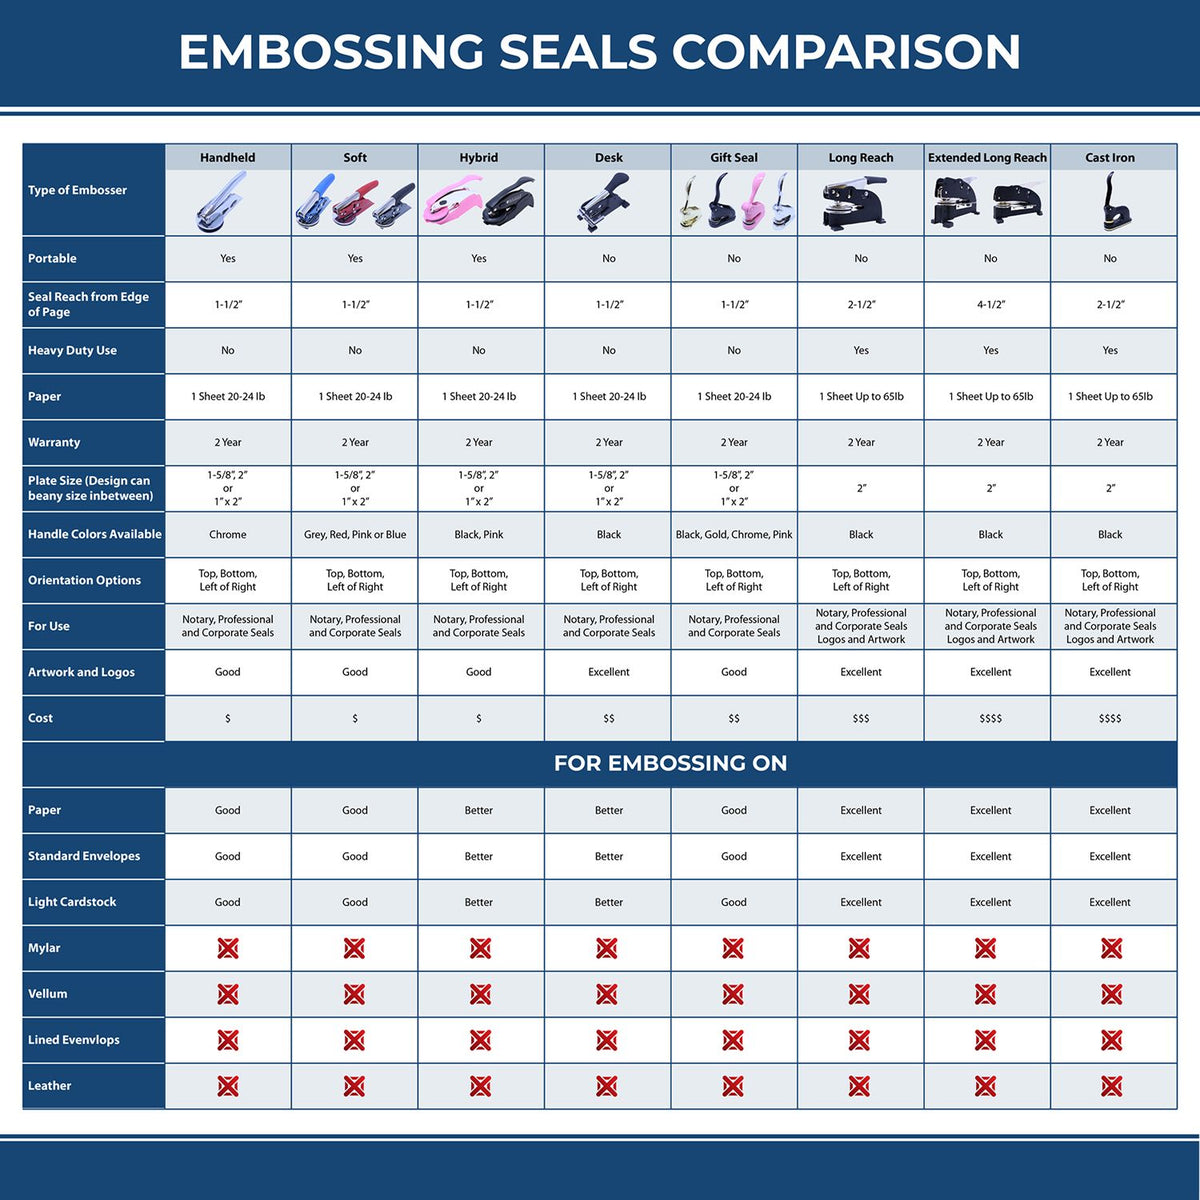 A comparison chart for the different types of mount models available for the Heavy Duty Cast Iron North Carolina Engineer Seal Embosser.